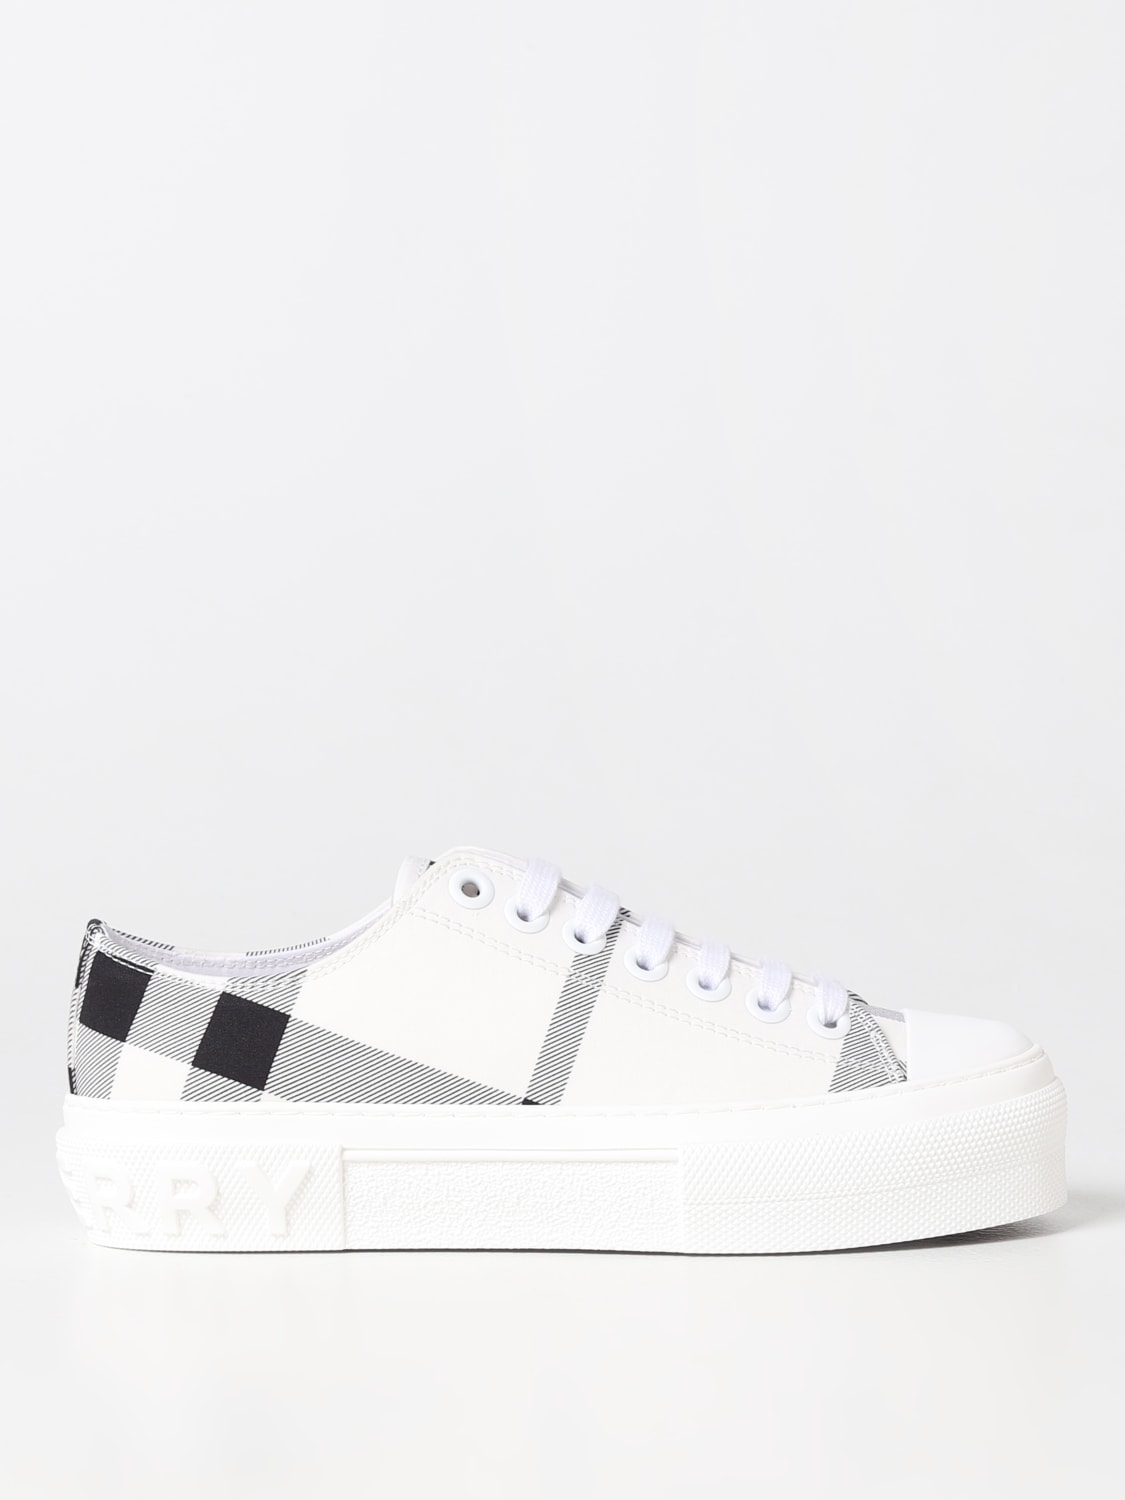 BURBERRY: Check sneakers in jacquard cotton - Black | Burberry